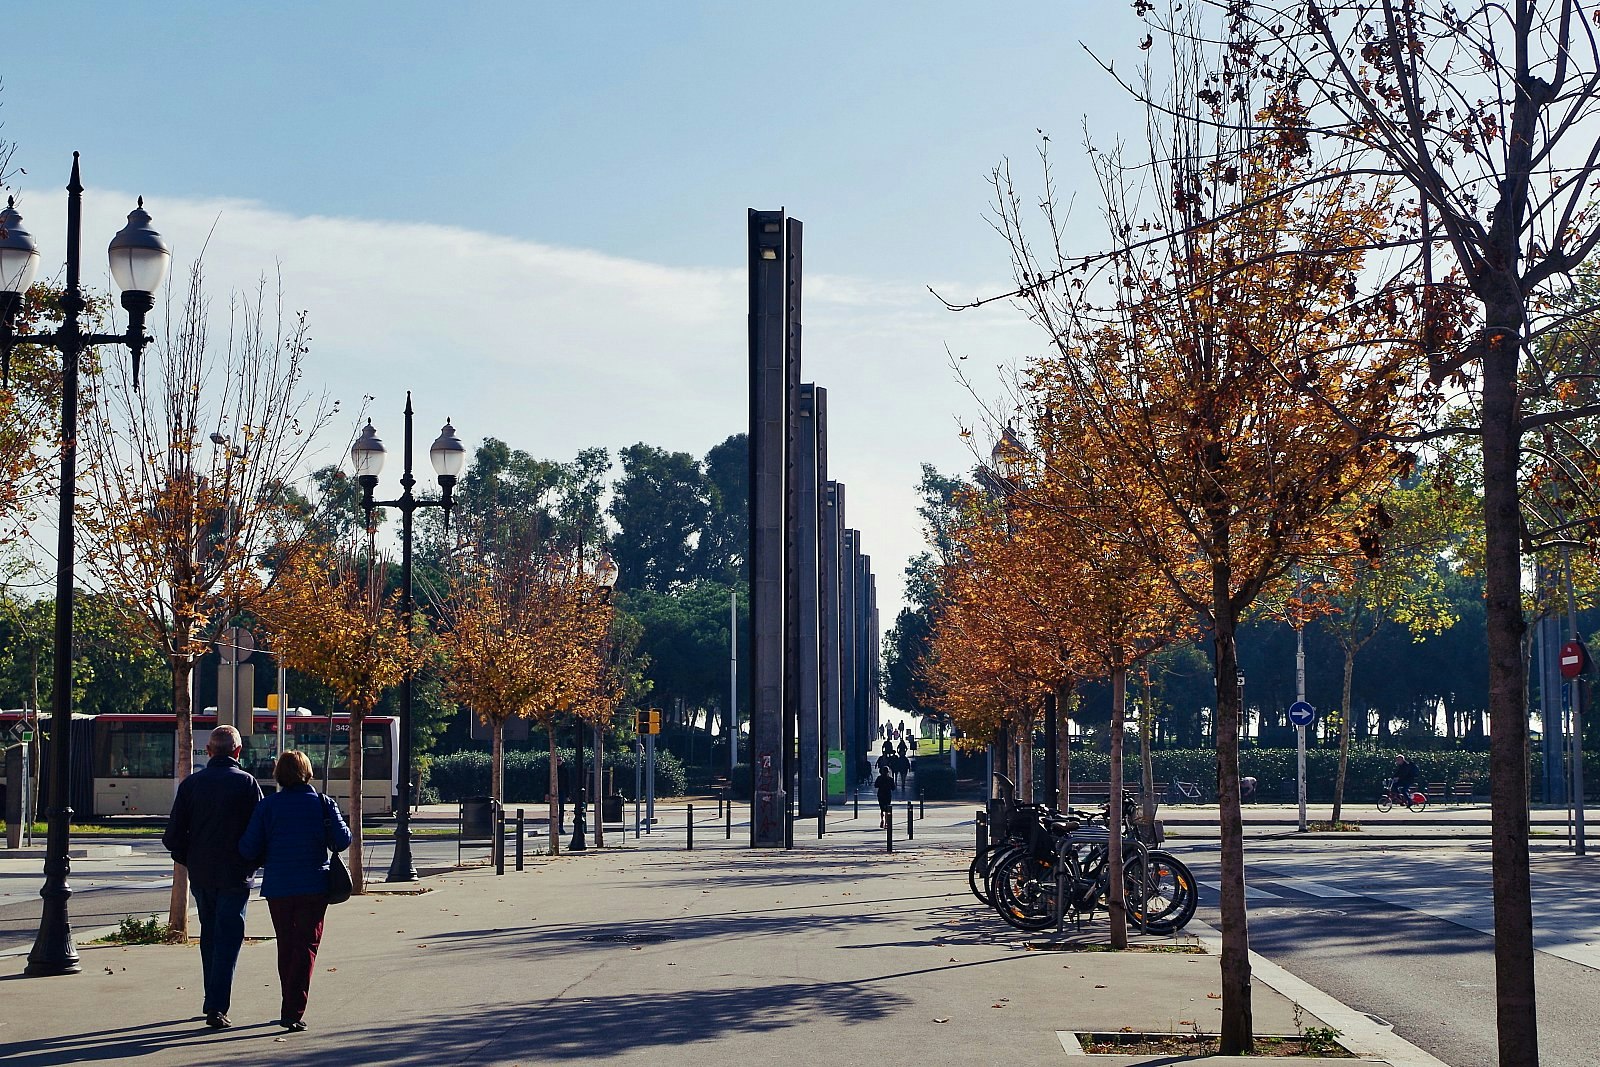 People walking down Rambla del Poblenou; the esplanade is lined with ornate lamp-posts and trees in autumnal colours, and there are sculptural columns further along the Rambla.